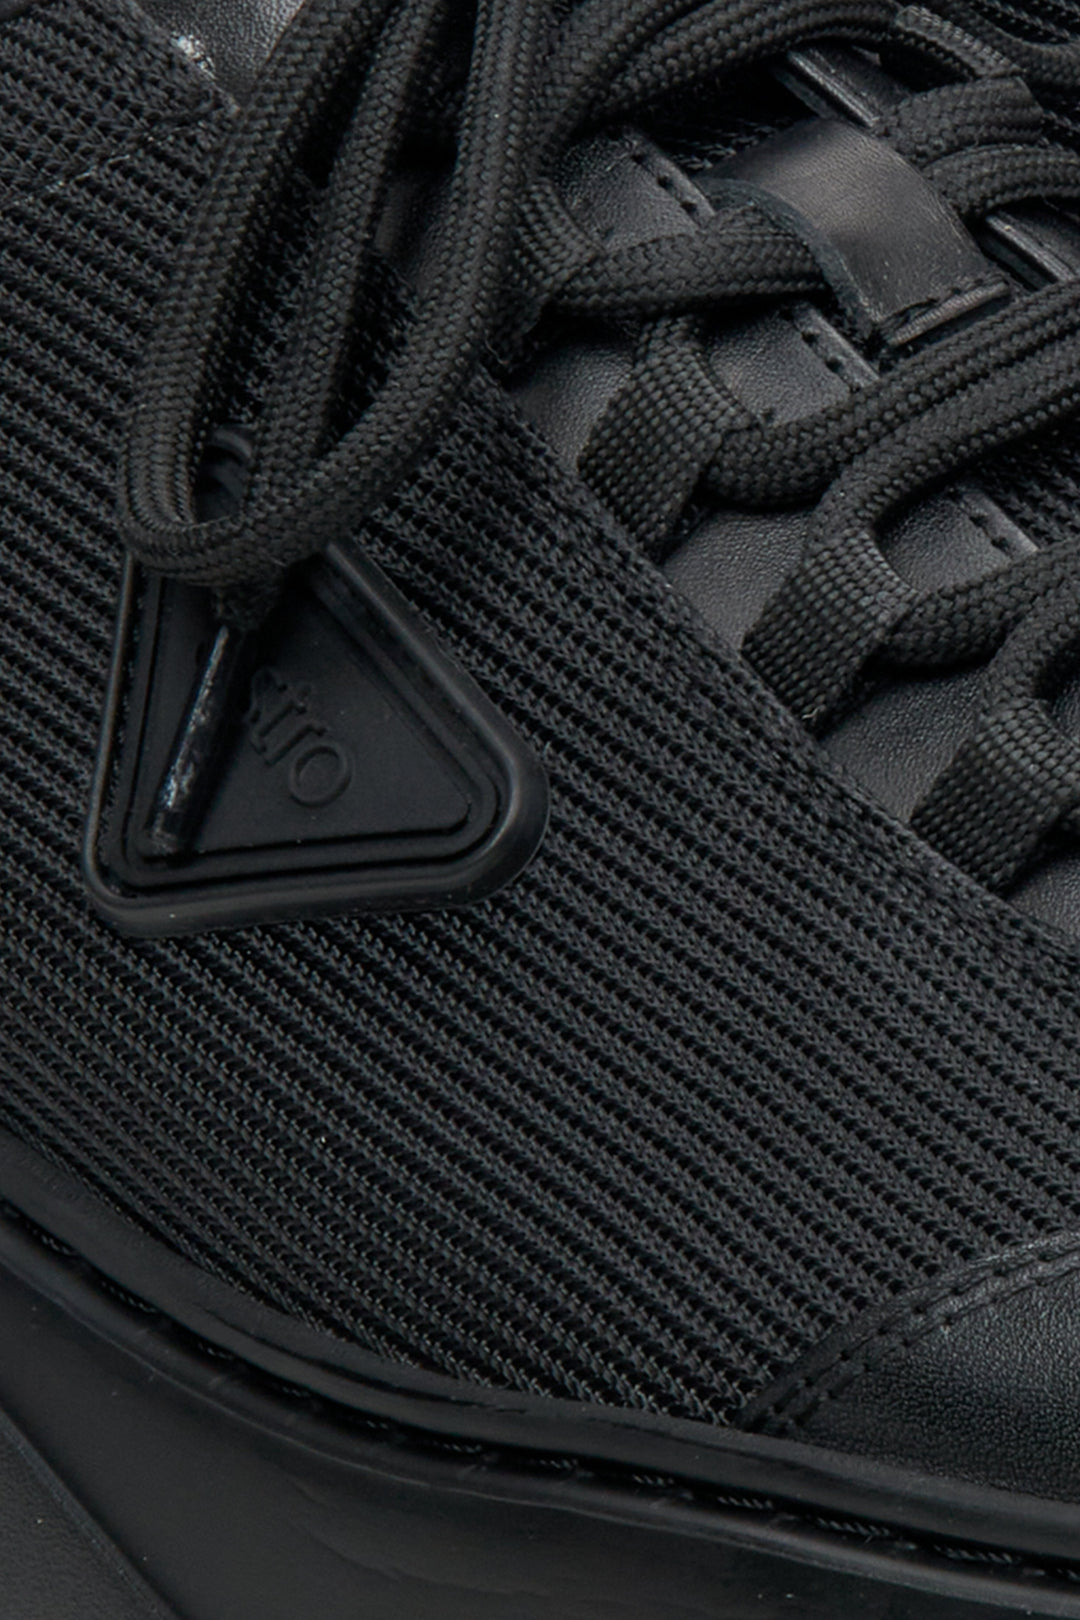 Men's black dress shoes by Estro made of mixed materials - close-up on the detail.